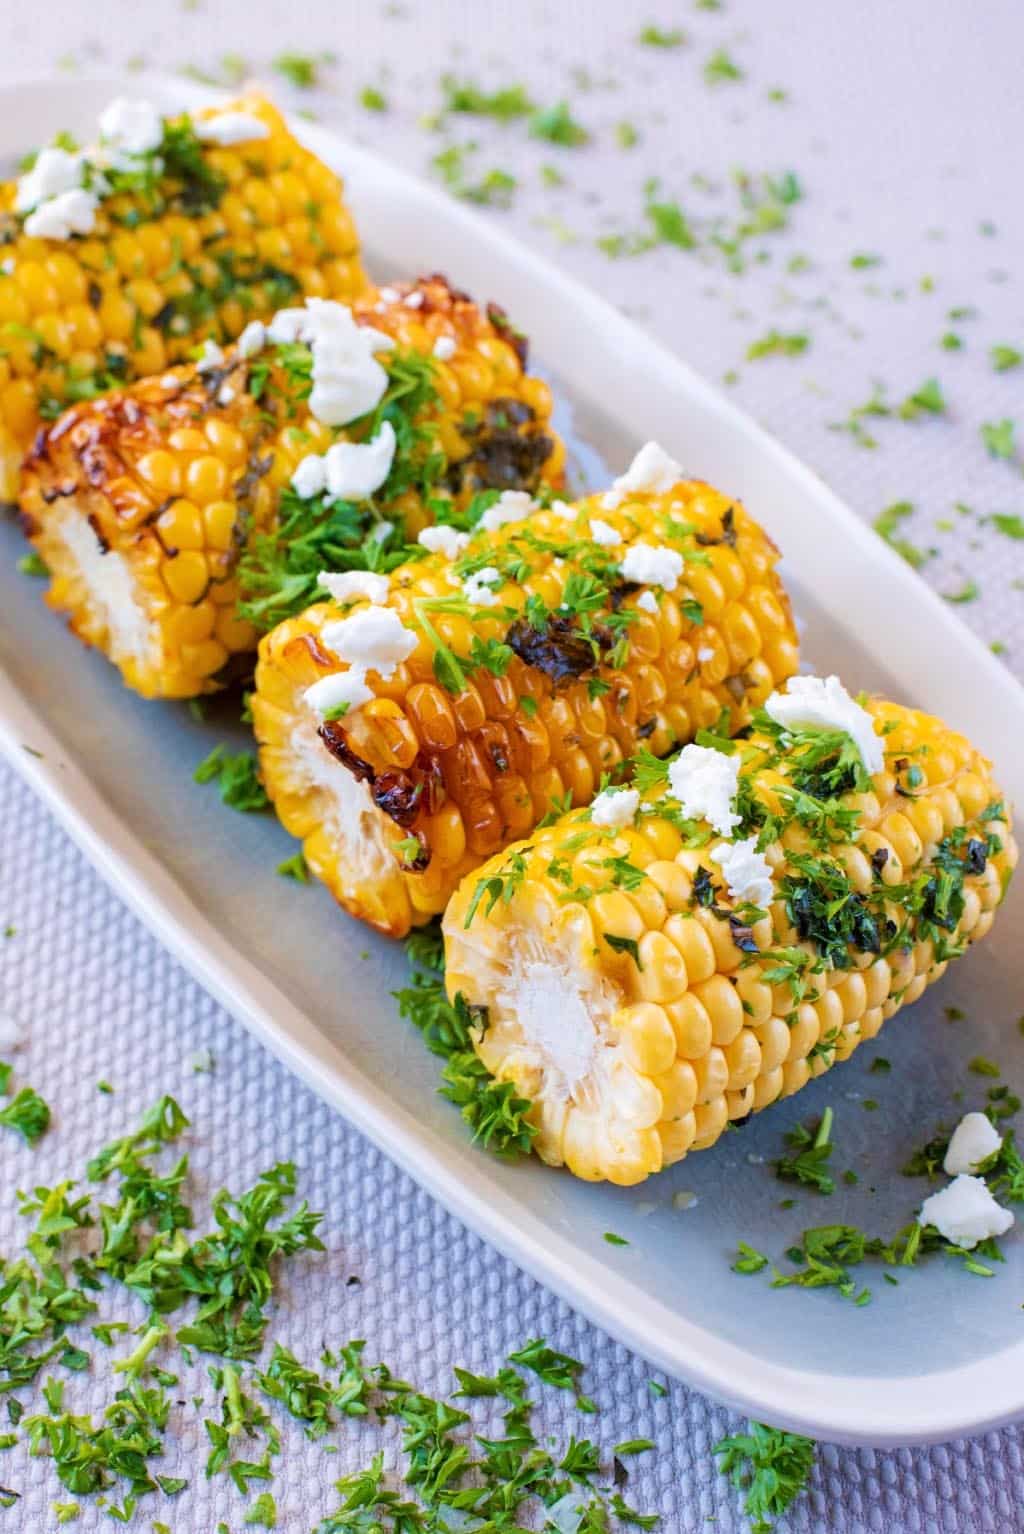 Grilled corn on the cob on a long serving dish.